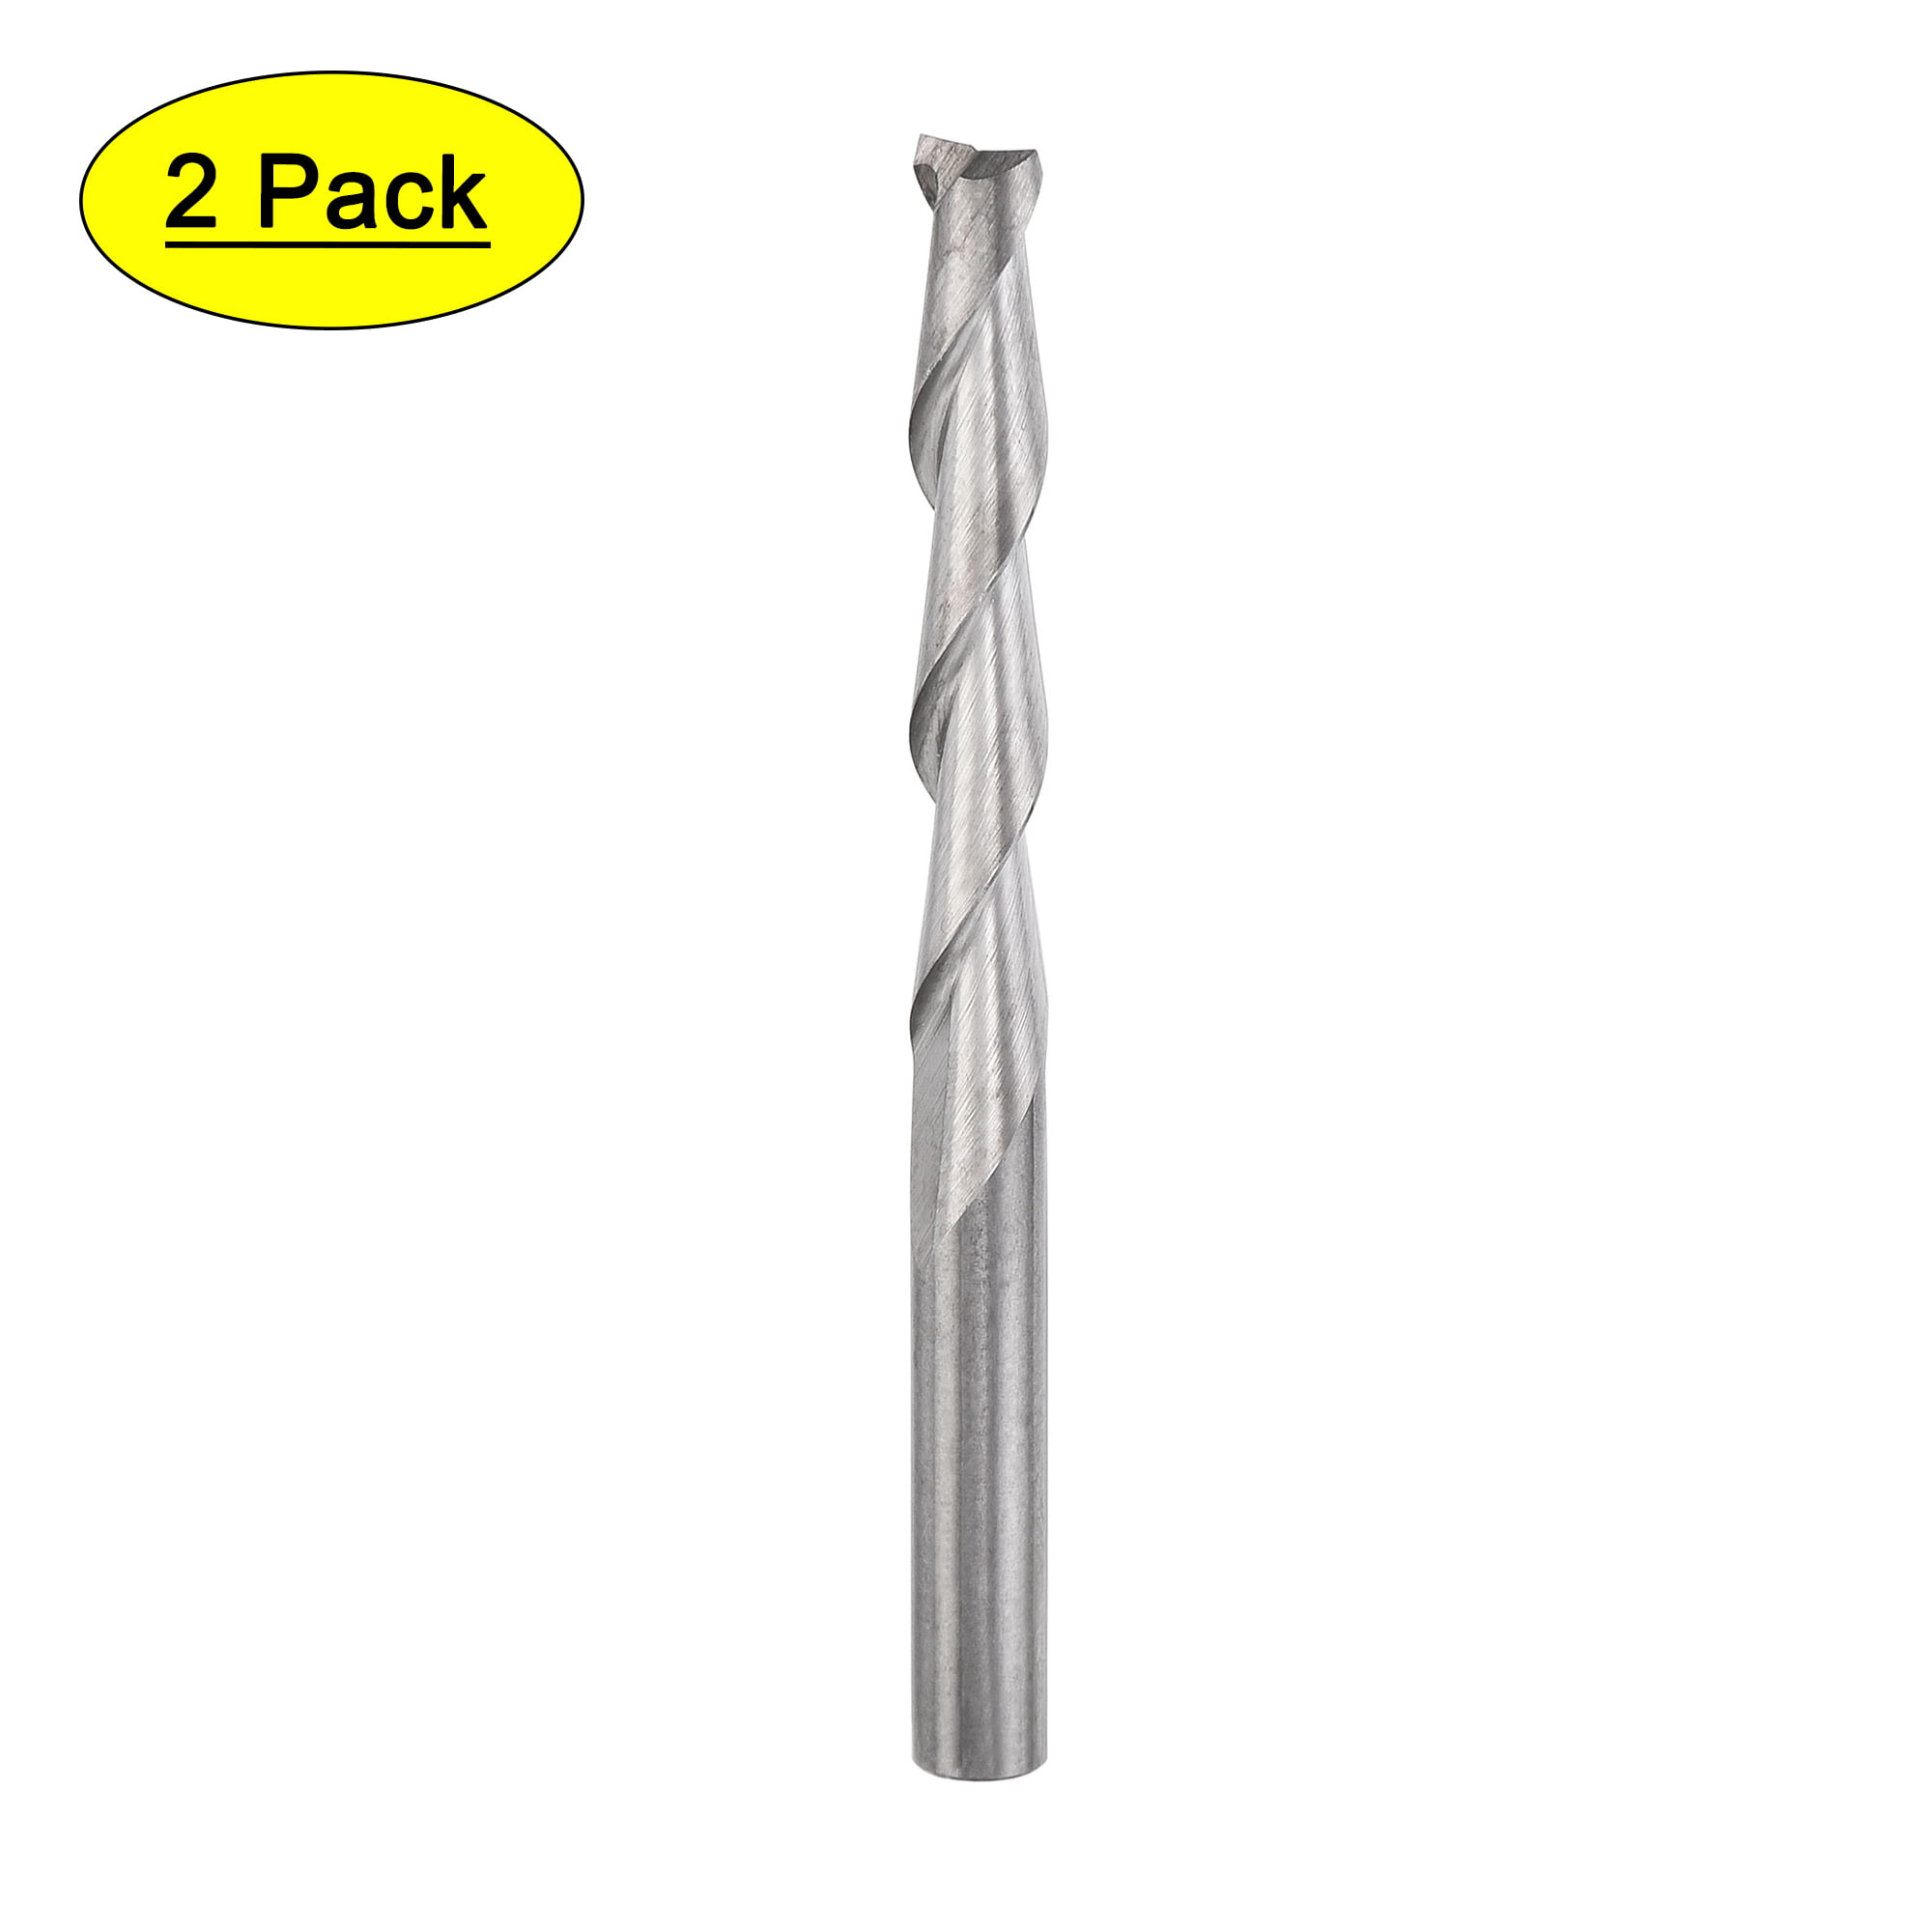 2* Single Flute Spiral End Mill Carbide Router Bits For Aluminium 4*22mm Parts 